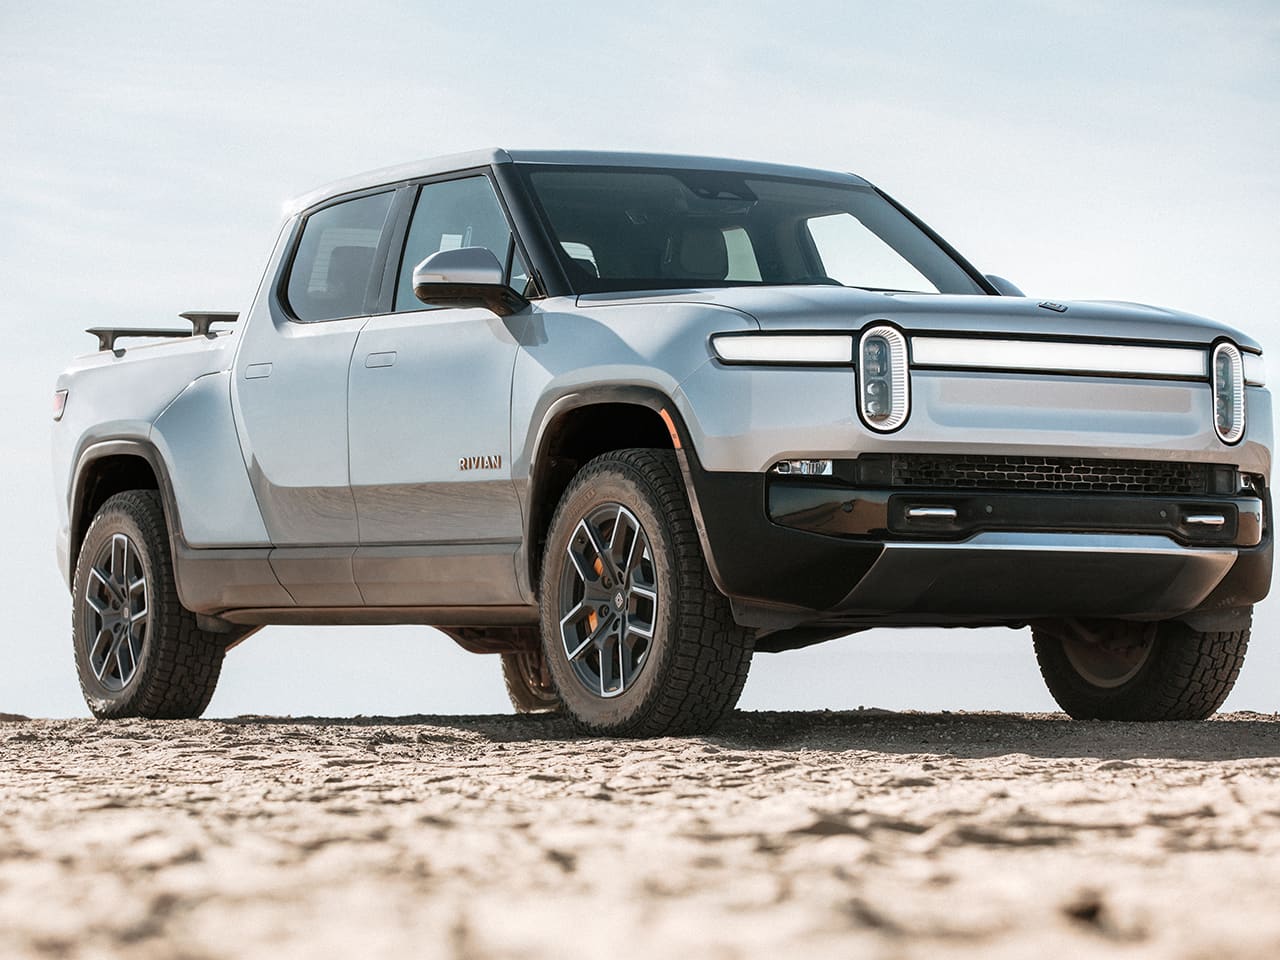 Rock Crawling in Your Rivian? Learn About the Limitations and Modifications Required